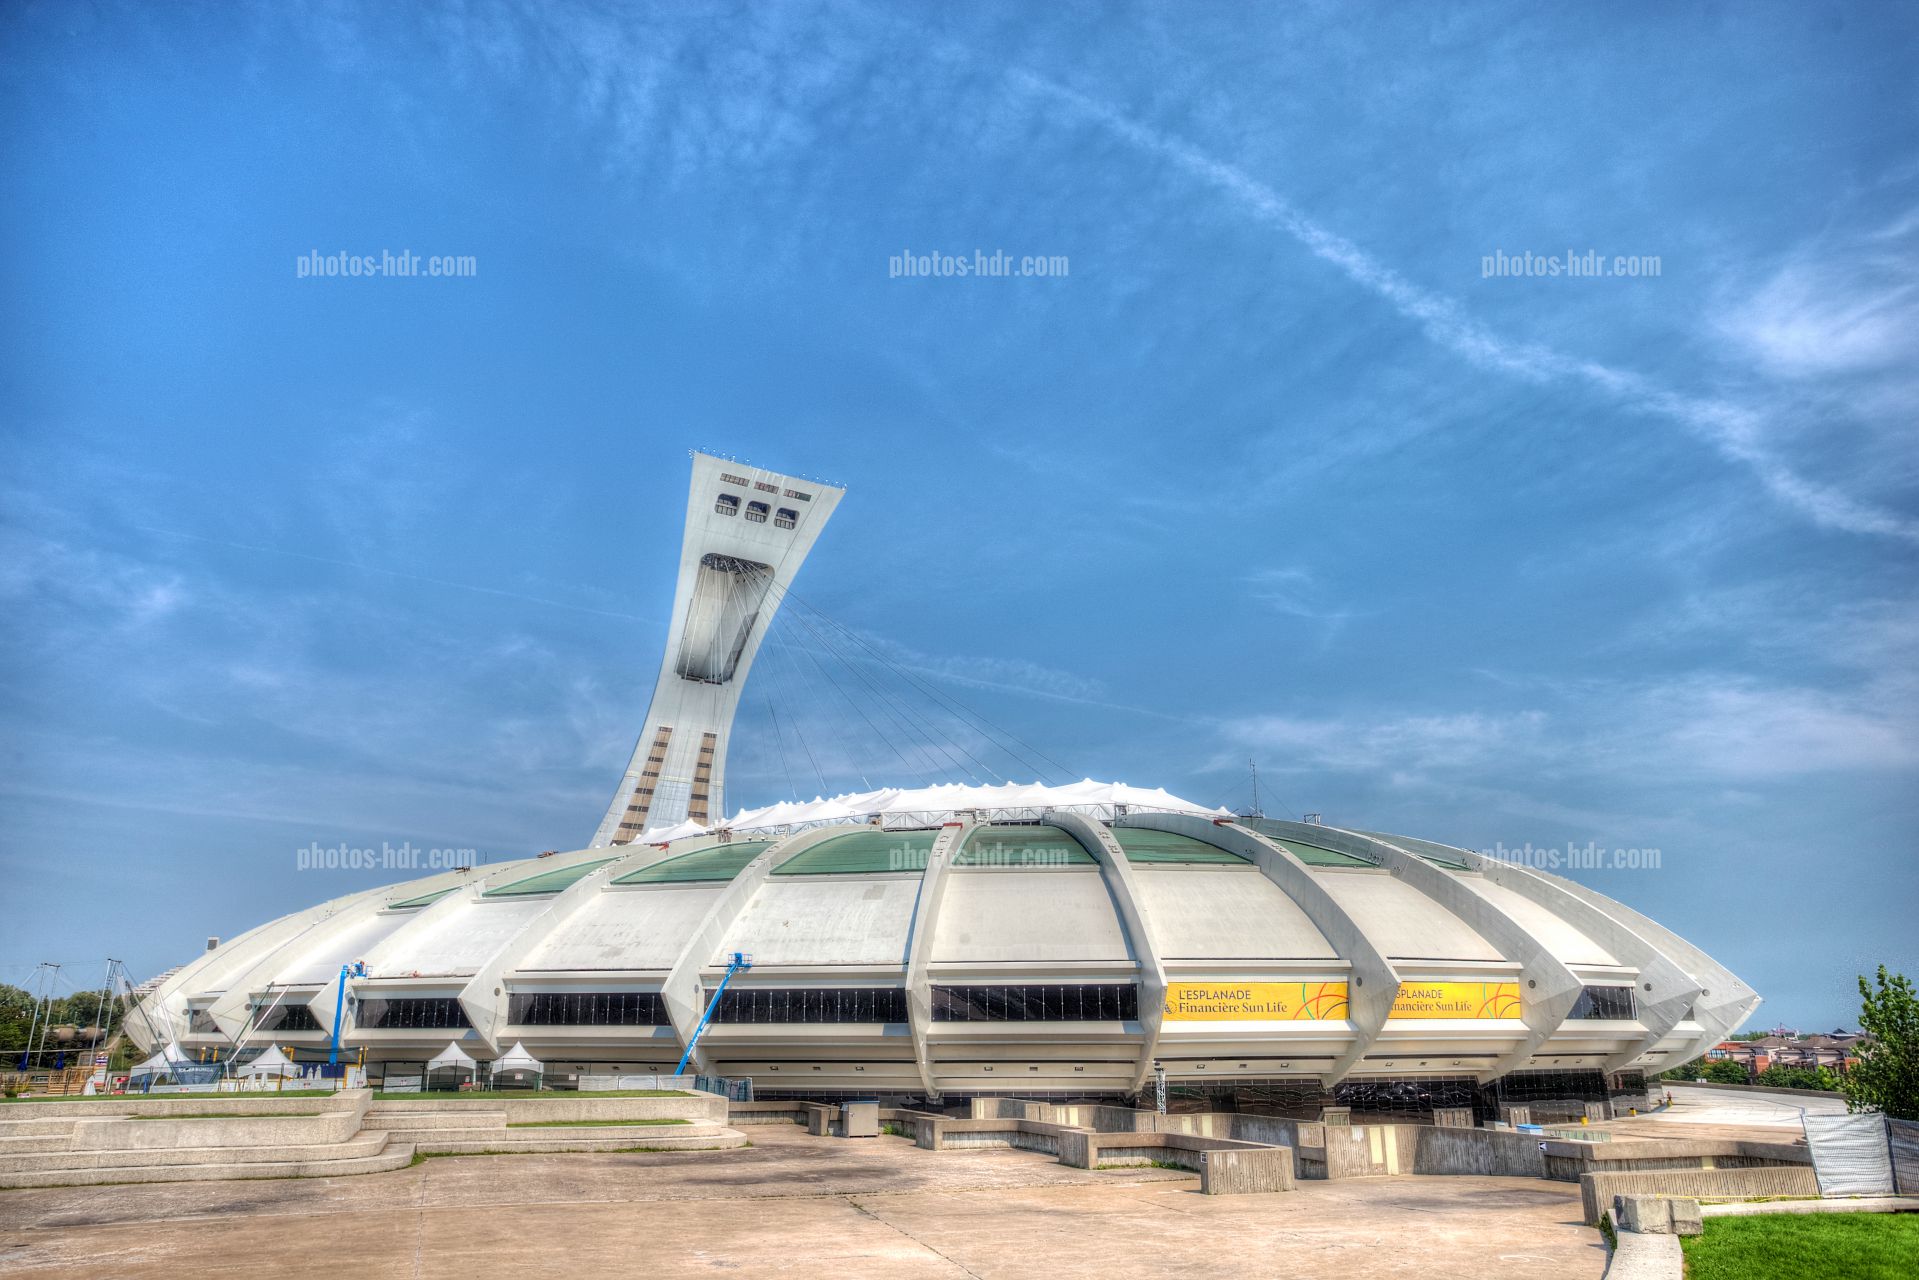 /Le stade olympique